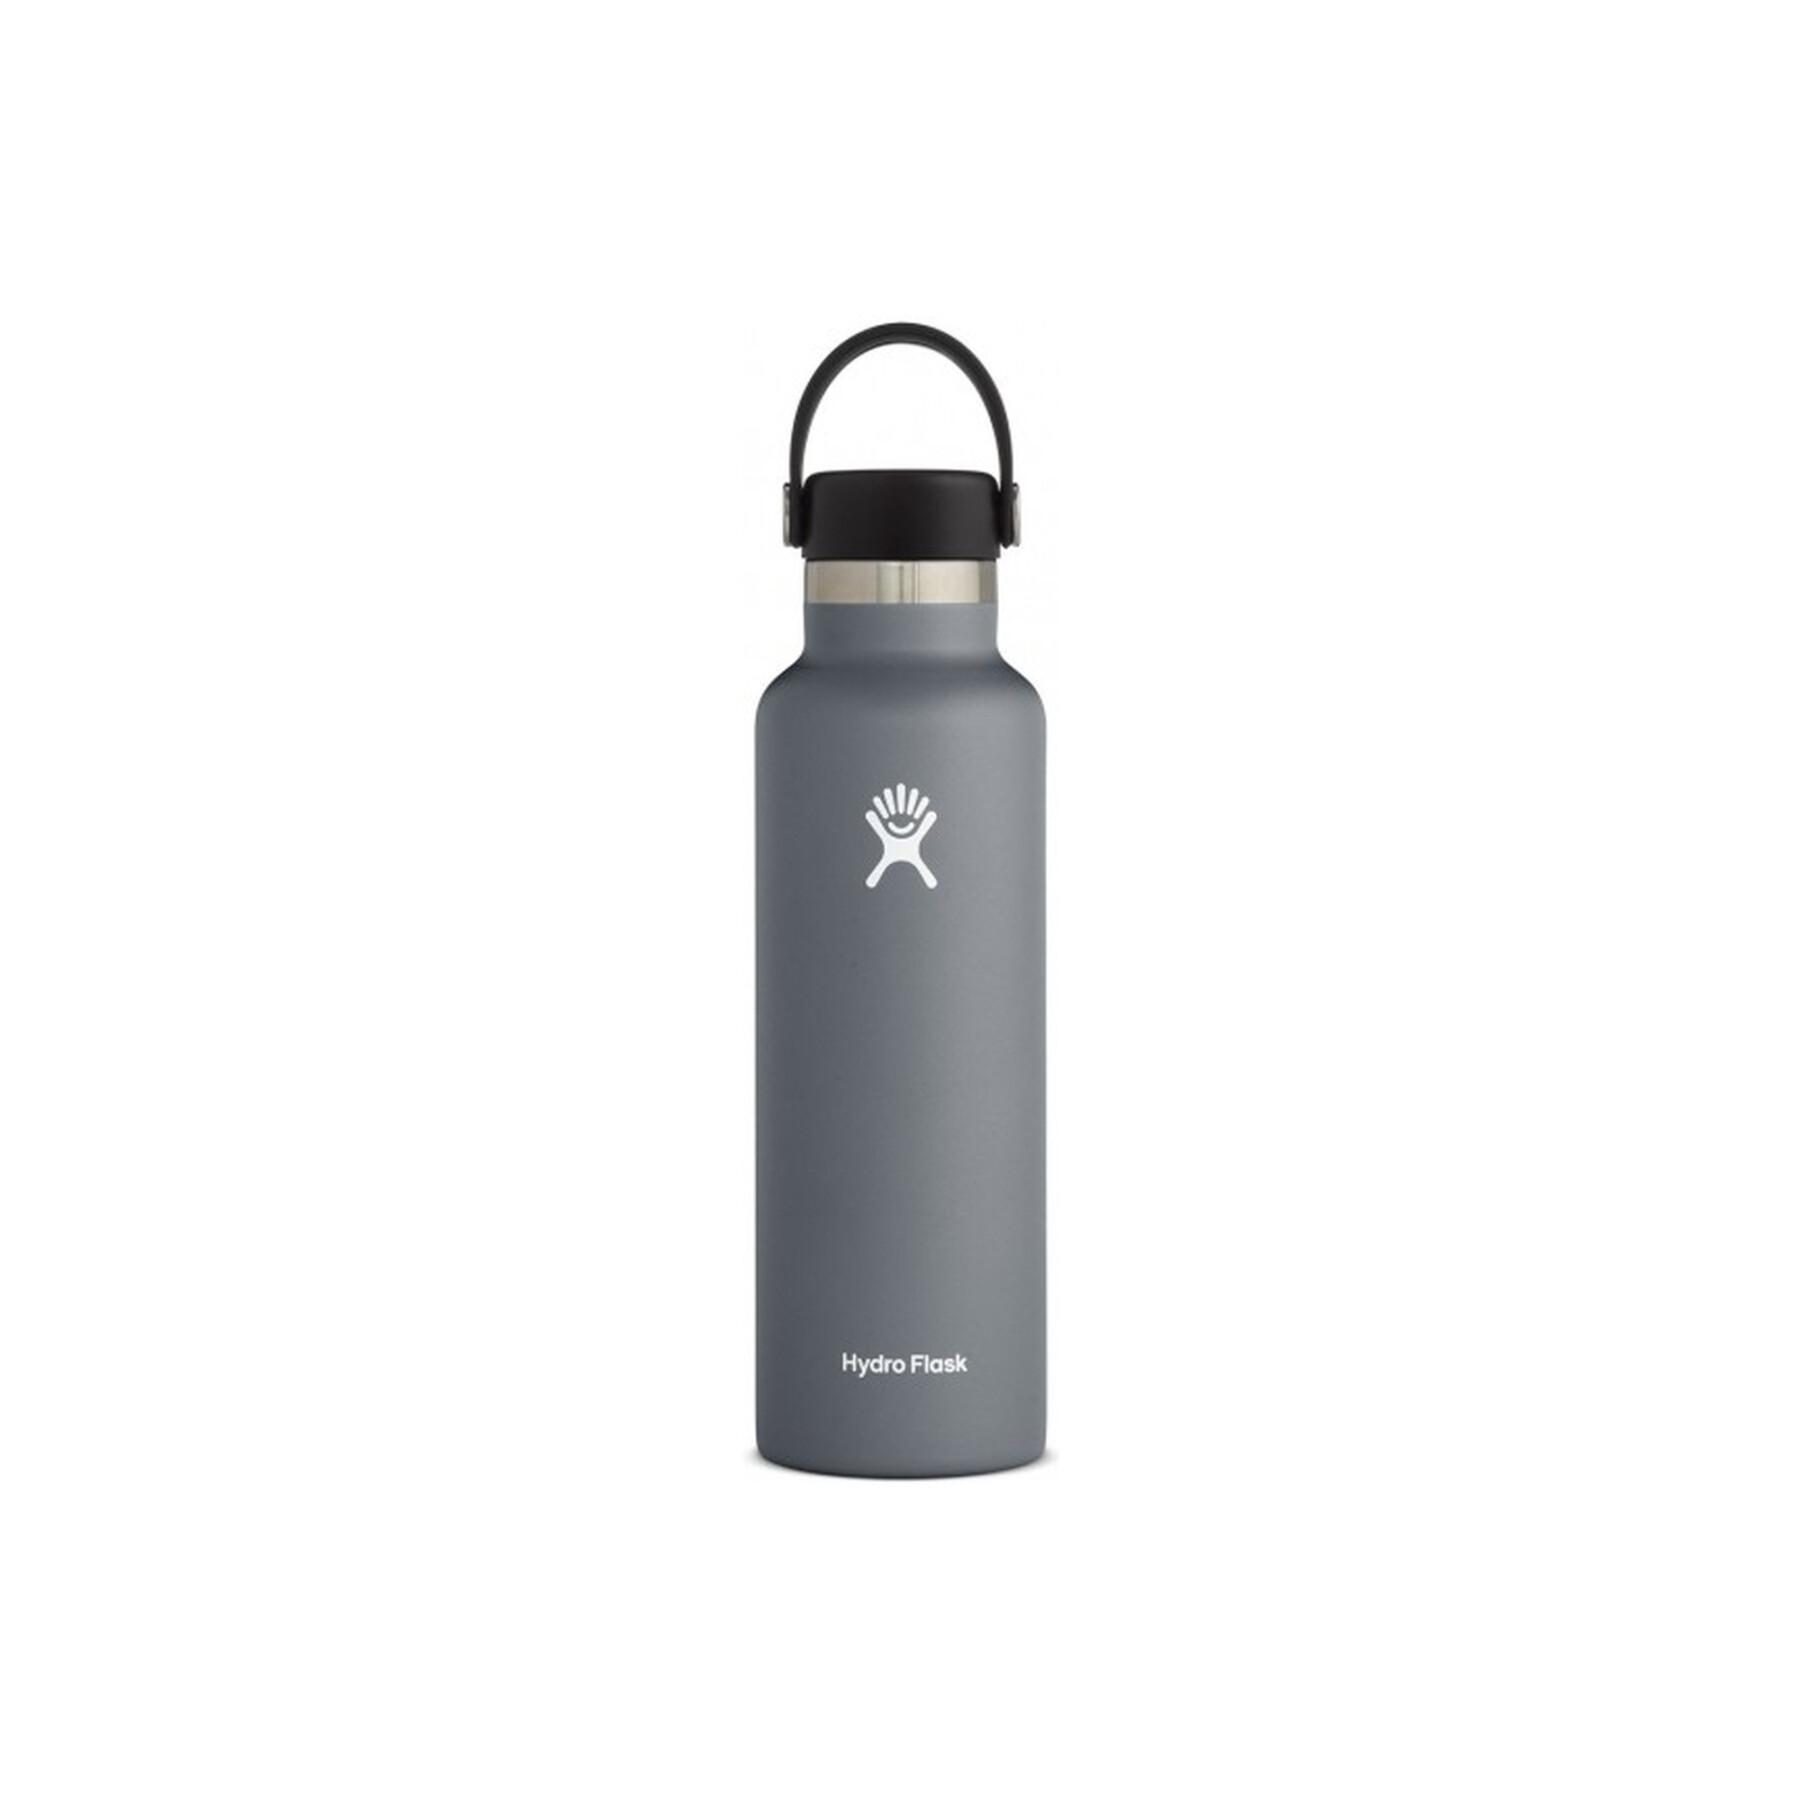 Standardtermos Hydro Flask with standard mouth flew cap 21 oz